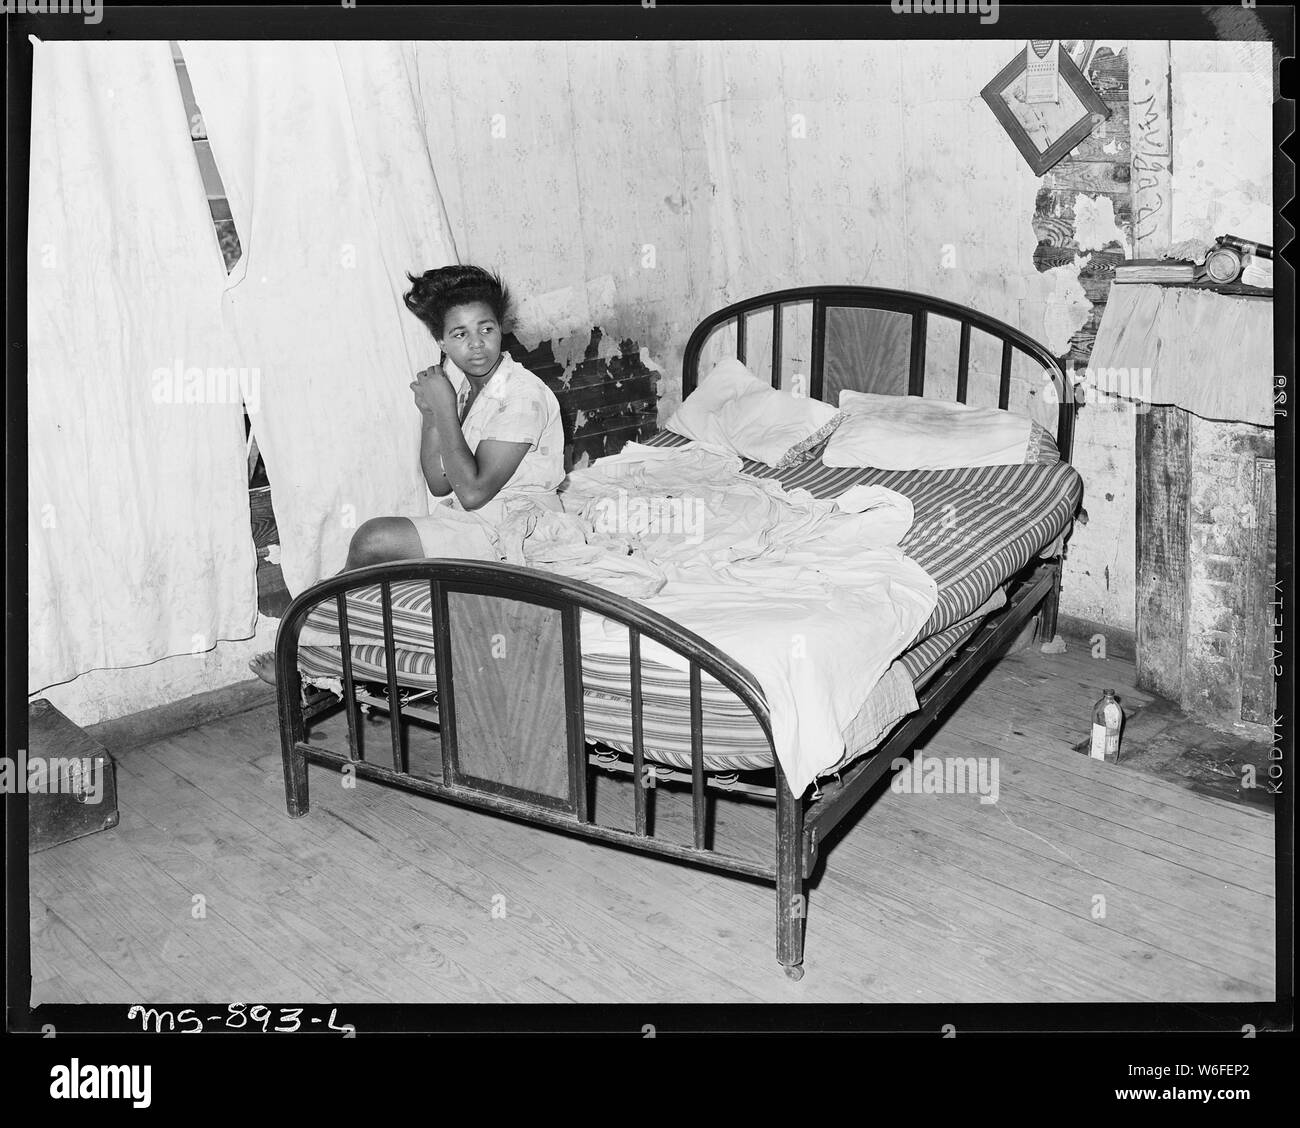 Bedroom of Eddie Cain, miner, who lives in company housing project. Adams, Rowe & Norman Inc., Porter Mine, Adamsville, Jefferson County, Alabama. Stock Photo